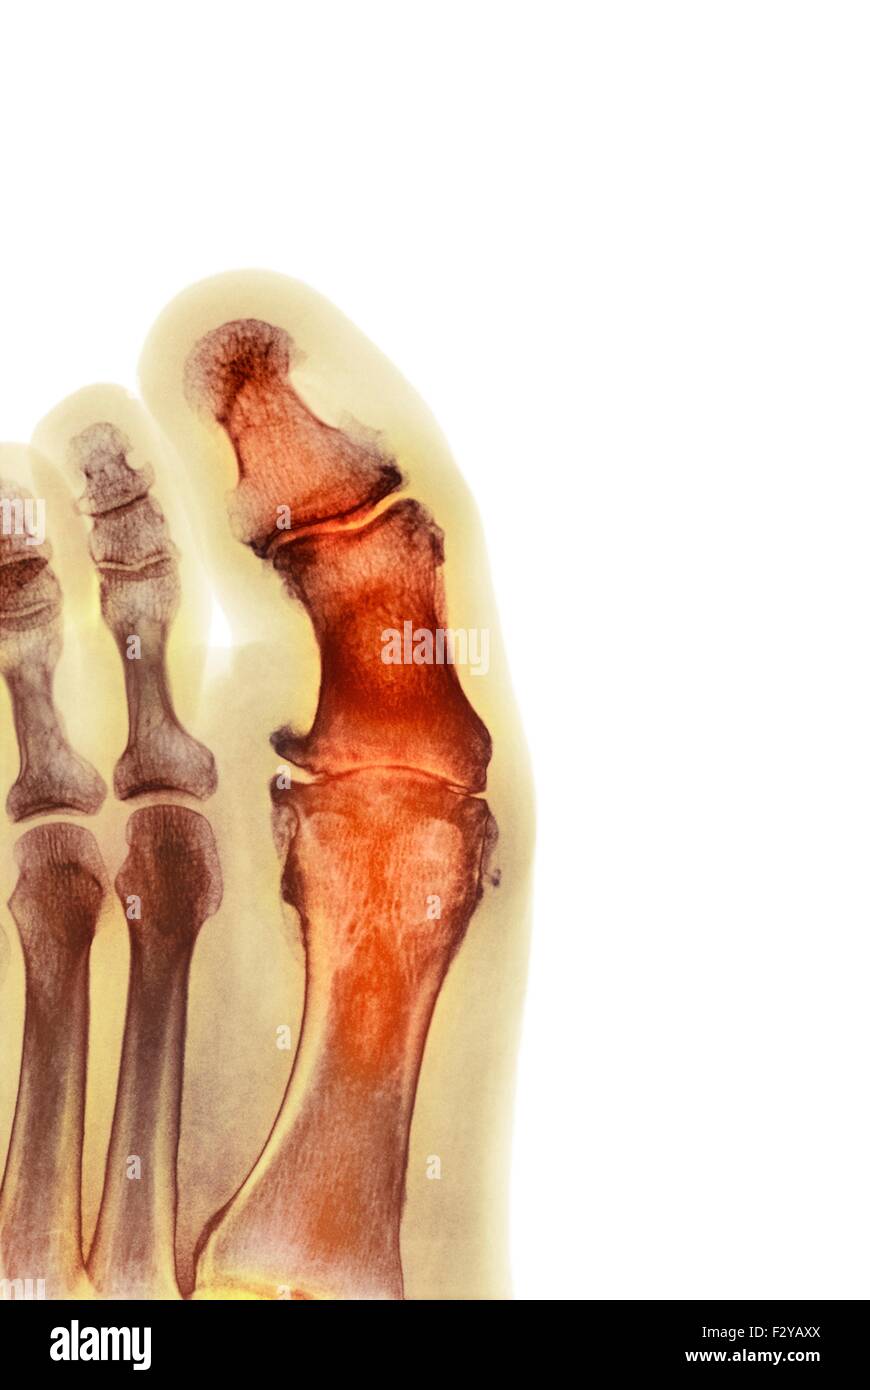 Degenerative Foot Deformation Coloured X Ray Of A Section Through The